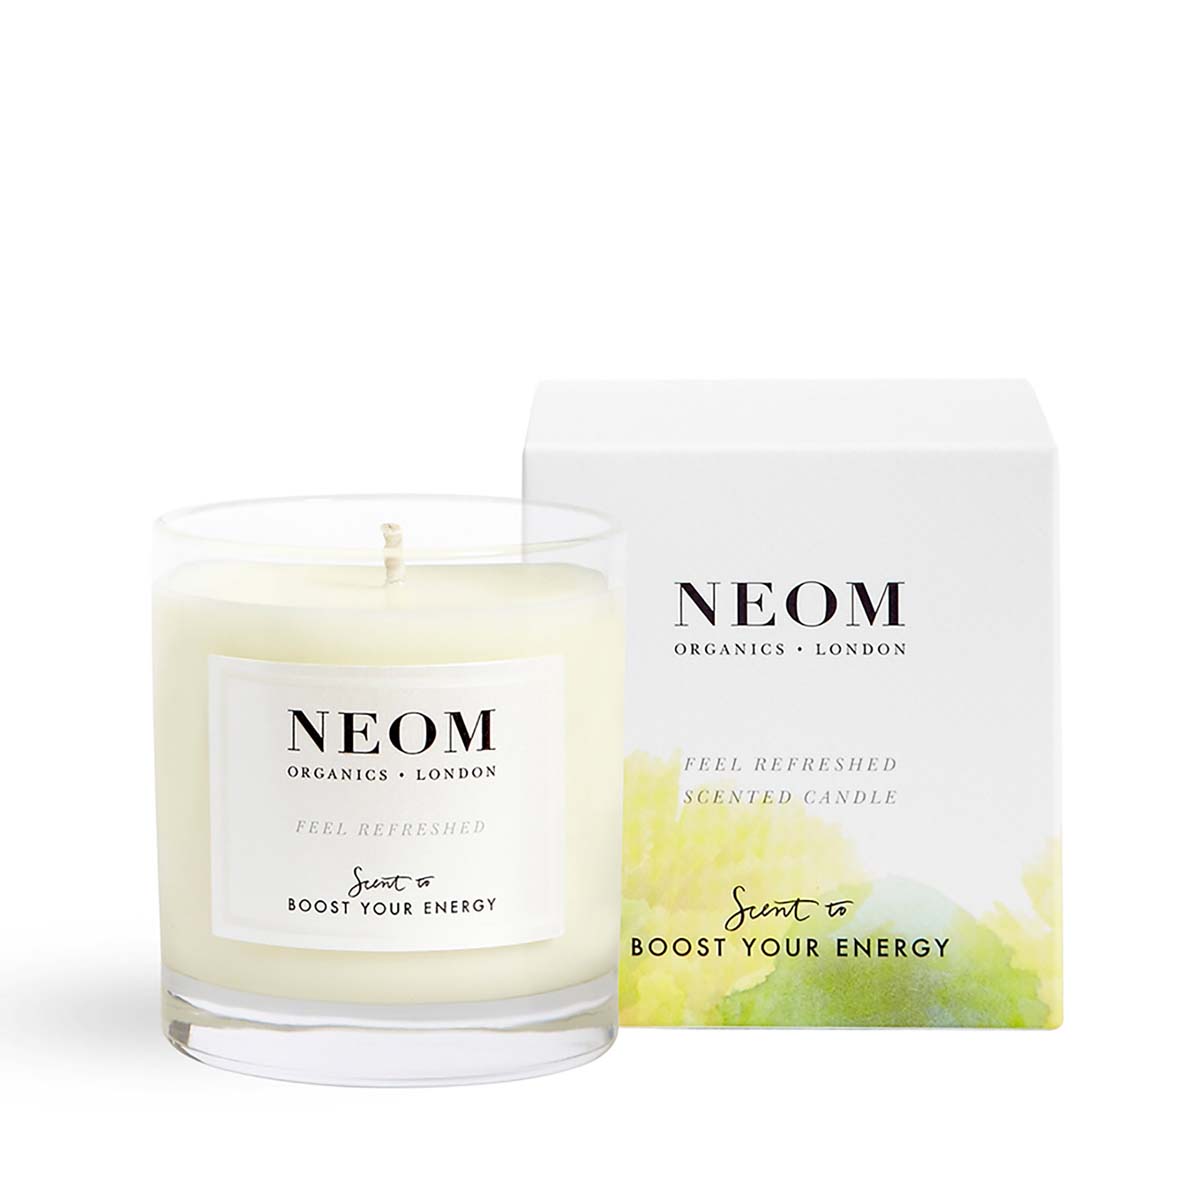 Neom Feel Refreshed Scented Candle (1 Wick) 185G